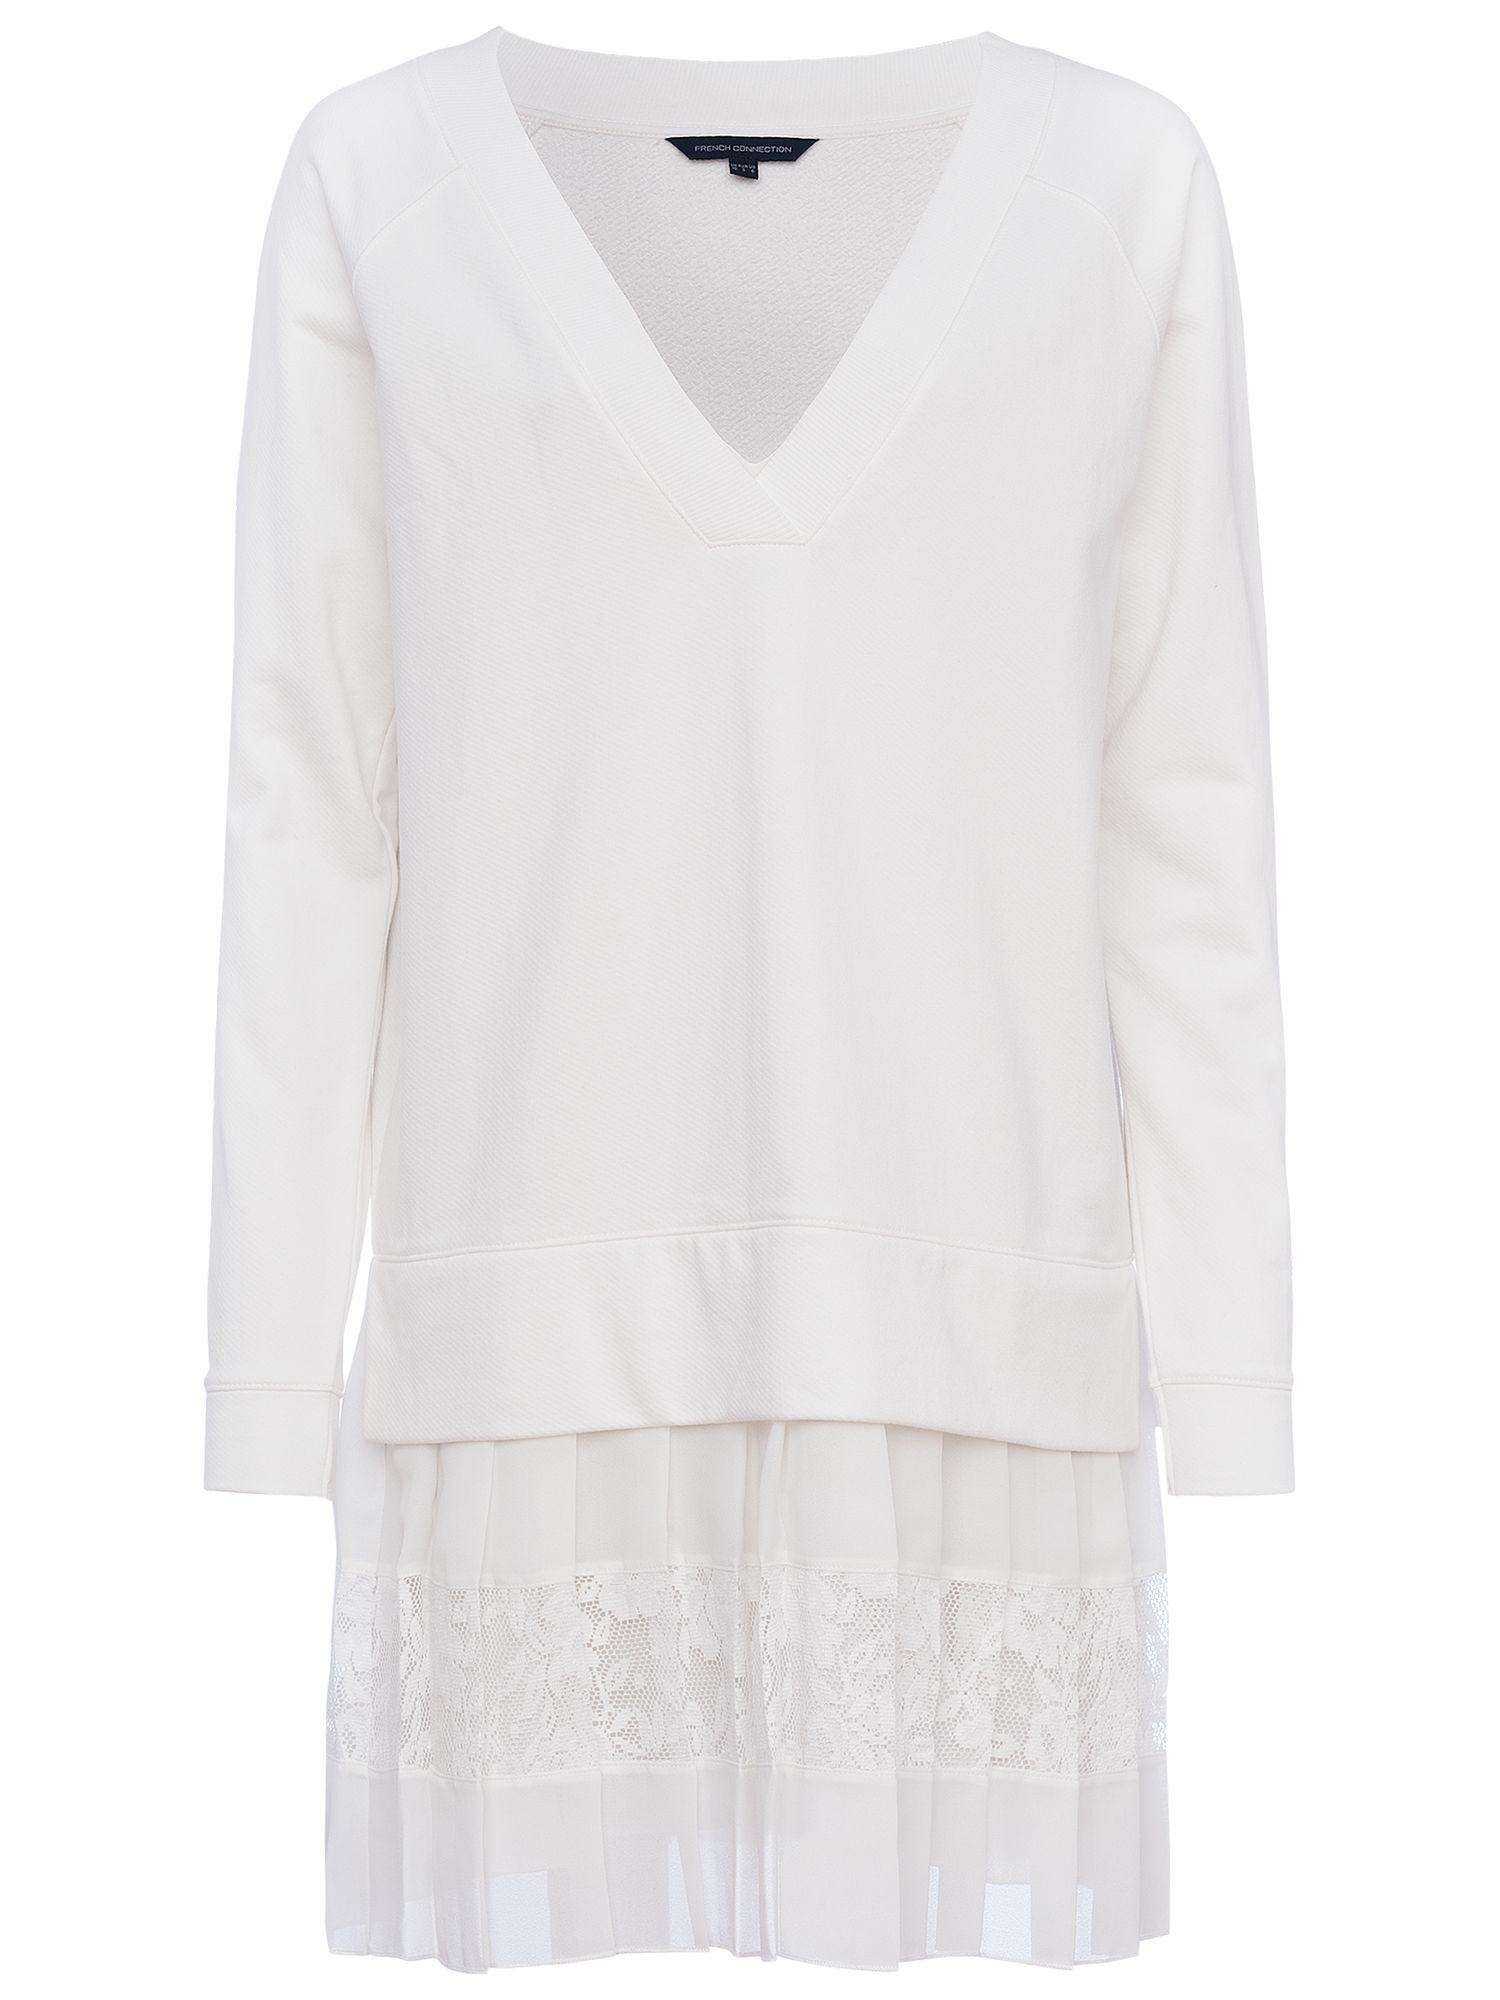 French Connection Eliza Long Sleeve Dress, Summer White